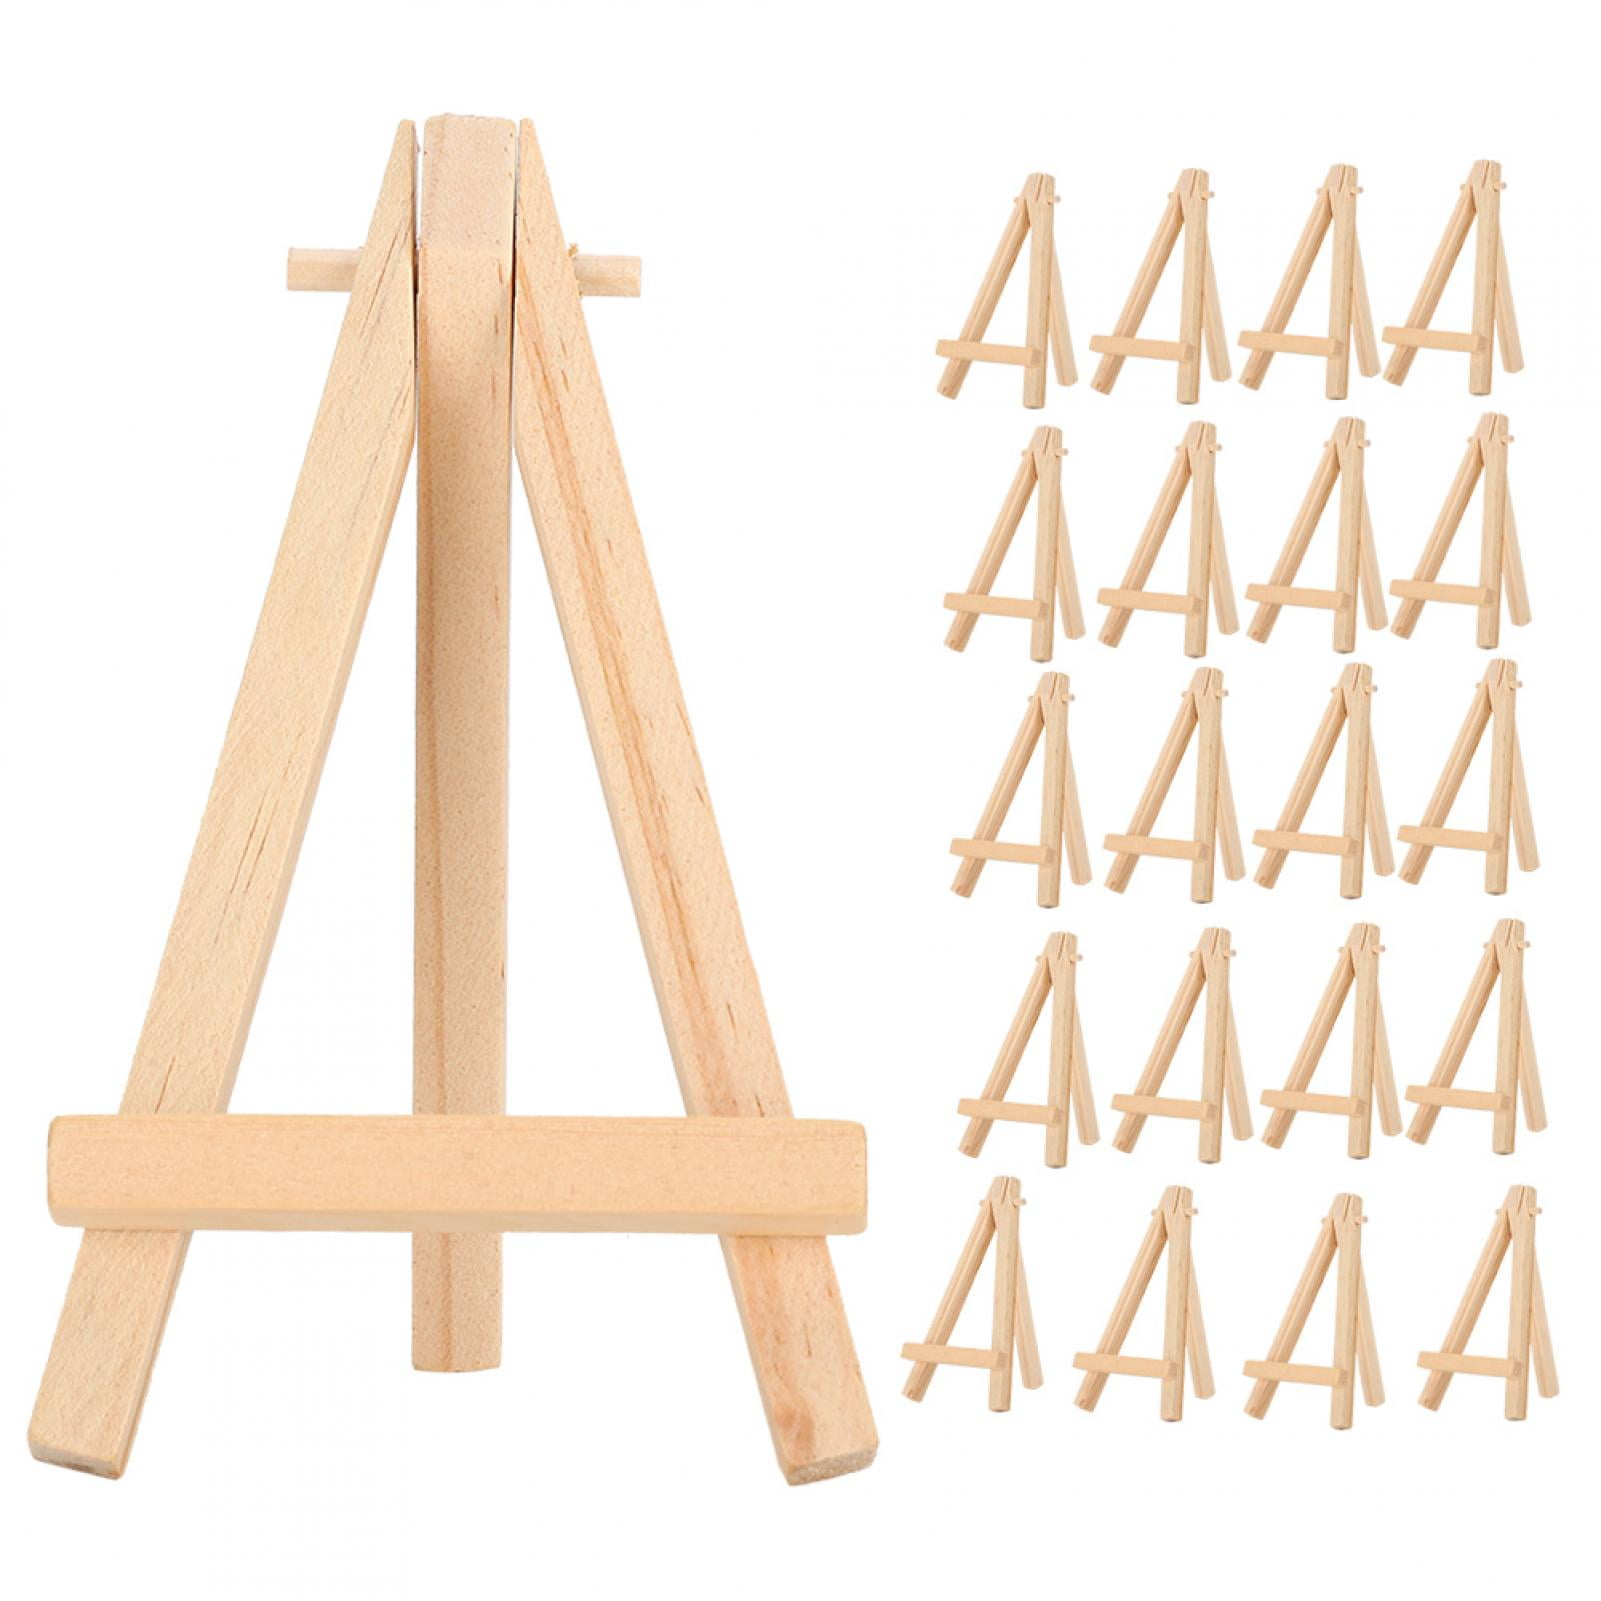 US Art Supply 5 Mini Black Wood Display Easel (Pack of 24), A-Frame Artist  Painting Party Tripod Easel - Tabletop Holder Stand for Small Canvases